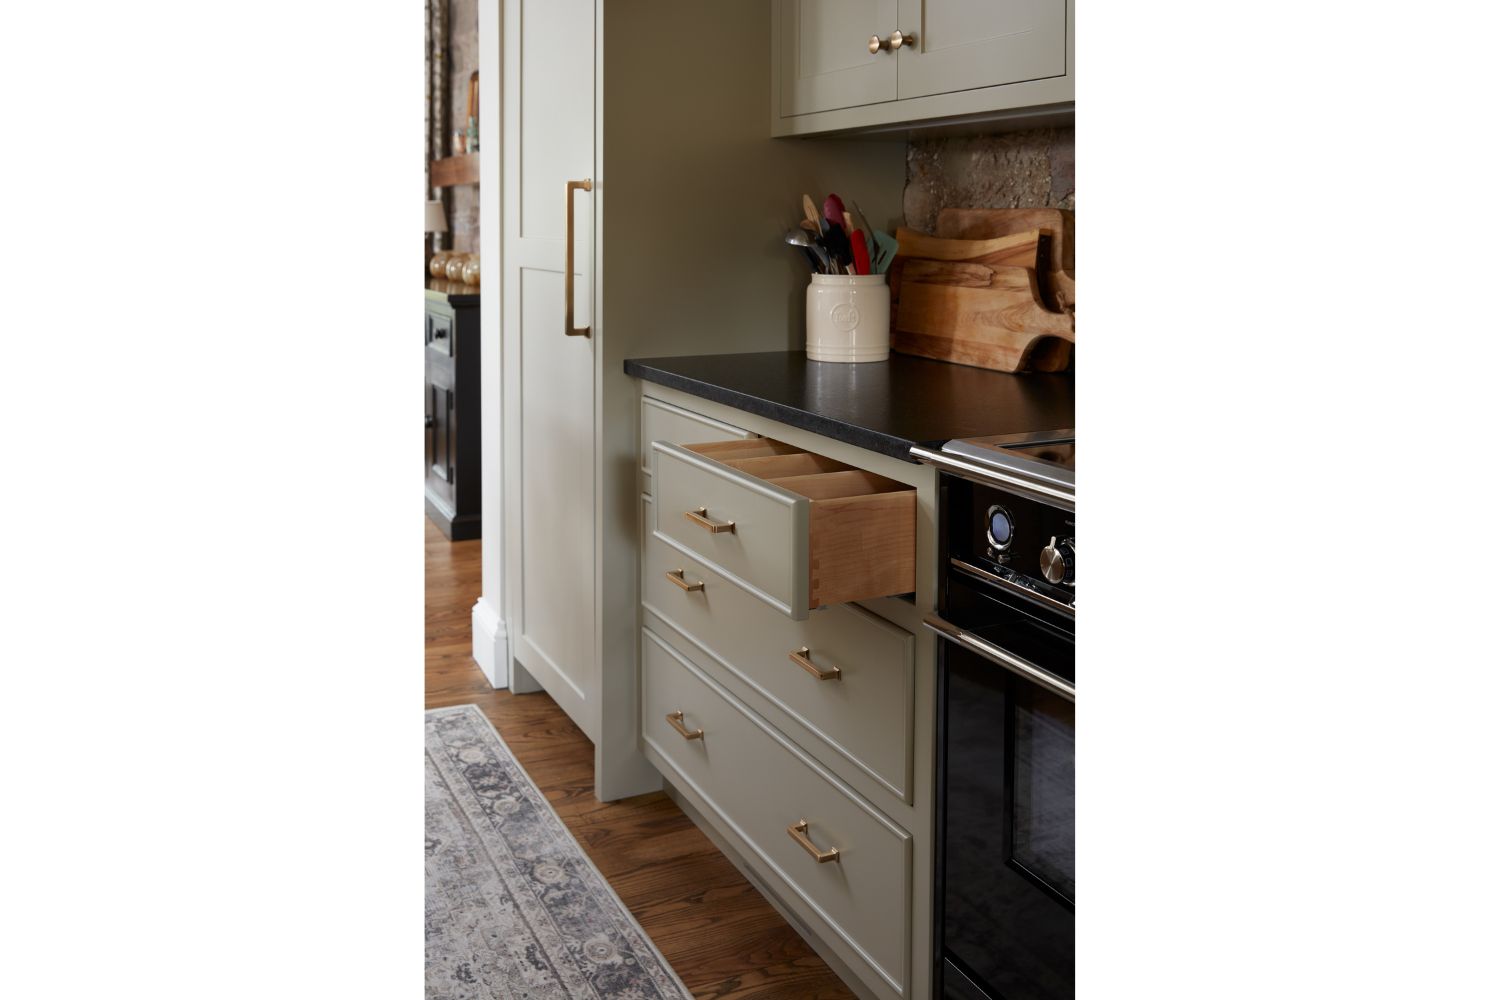 Gray kitchen cabinets with open dovetail detailed drawer